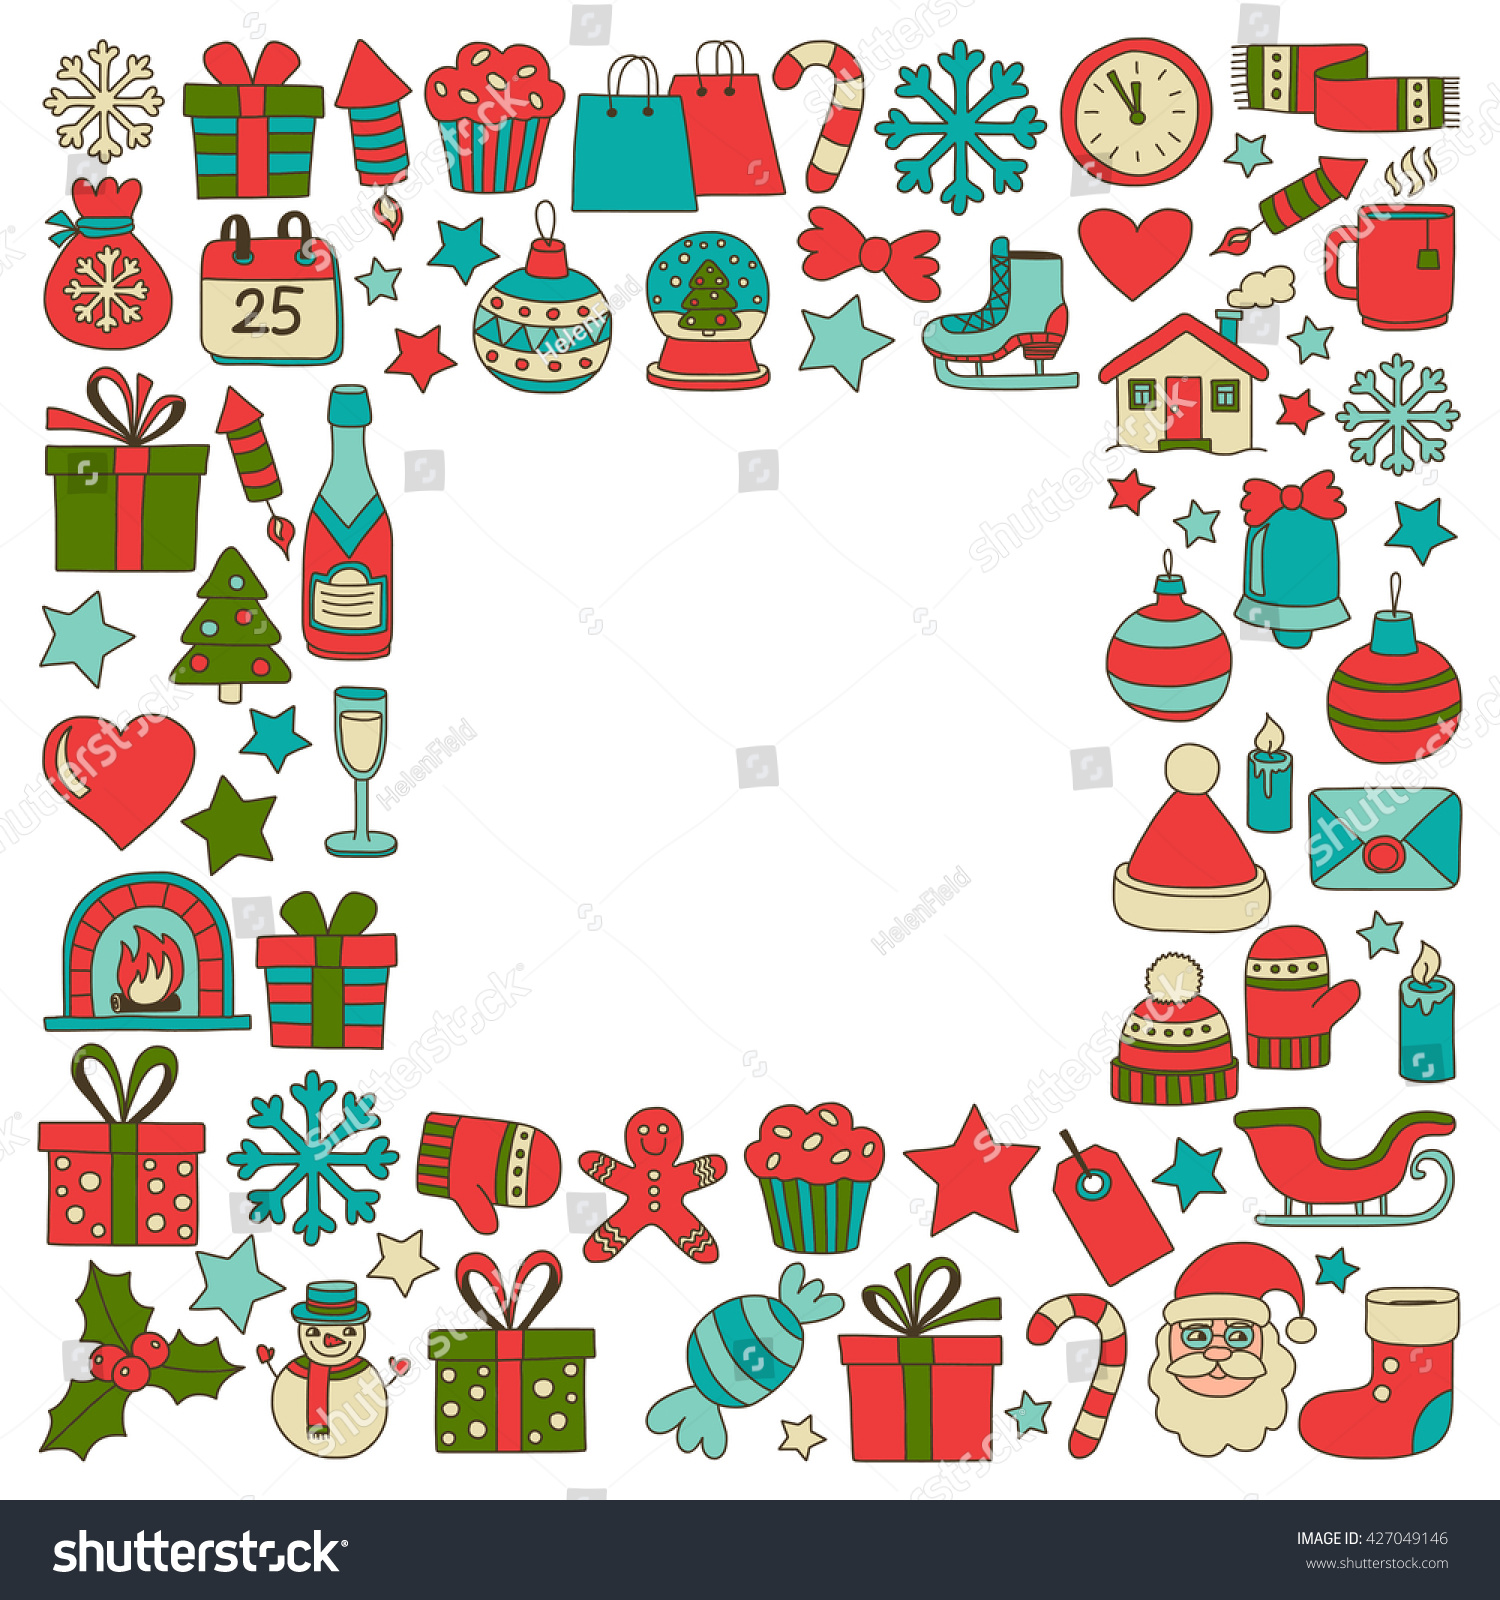 Doodle Vector Icons Merry Christmas And Happy New Year - 427049146 : Shutterstock